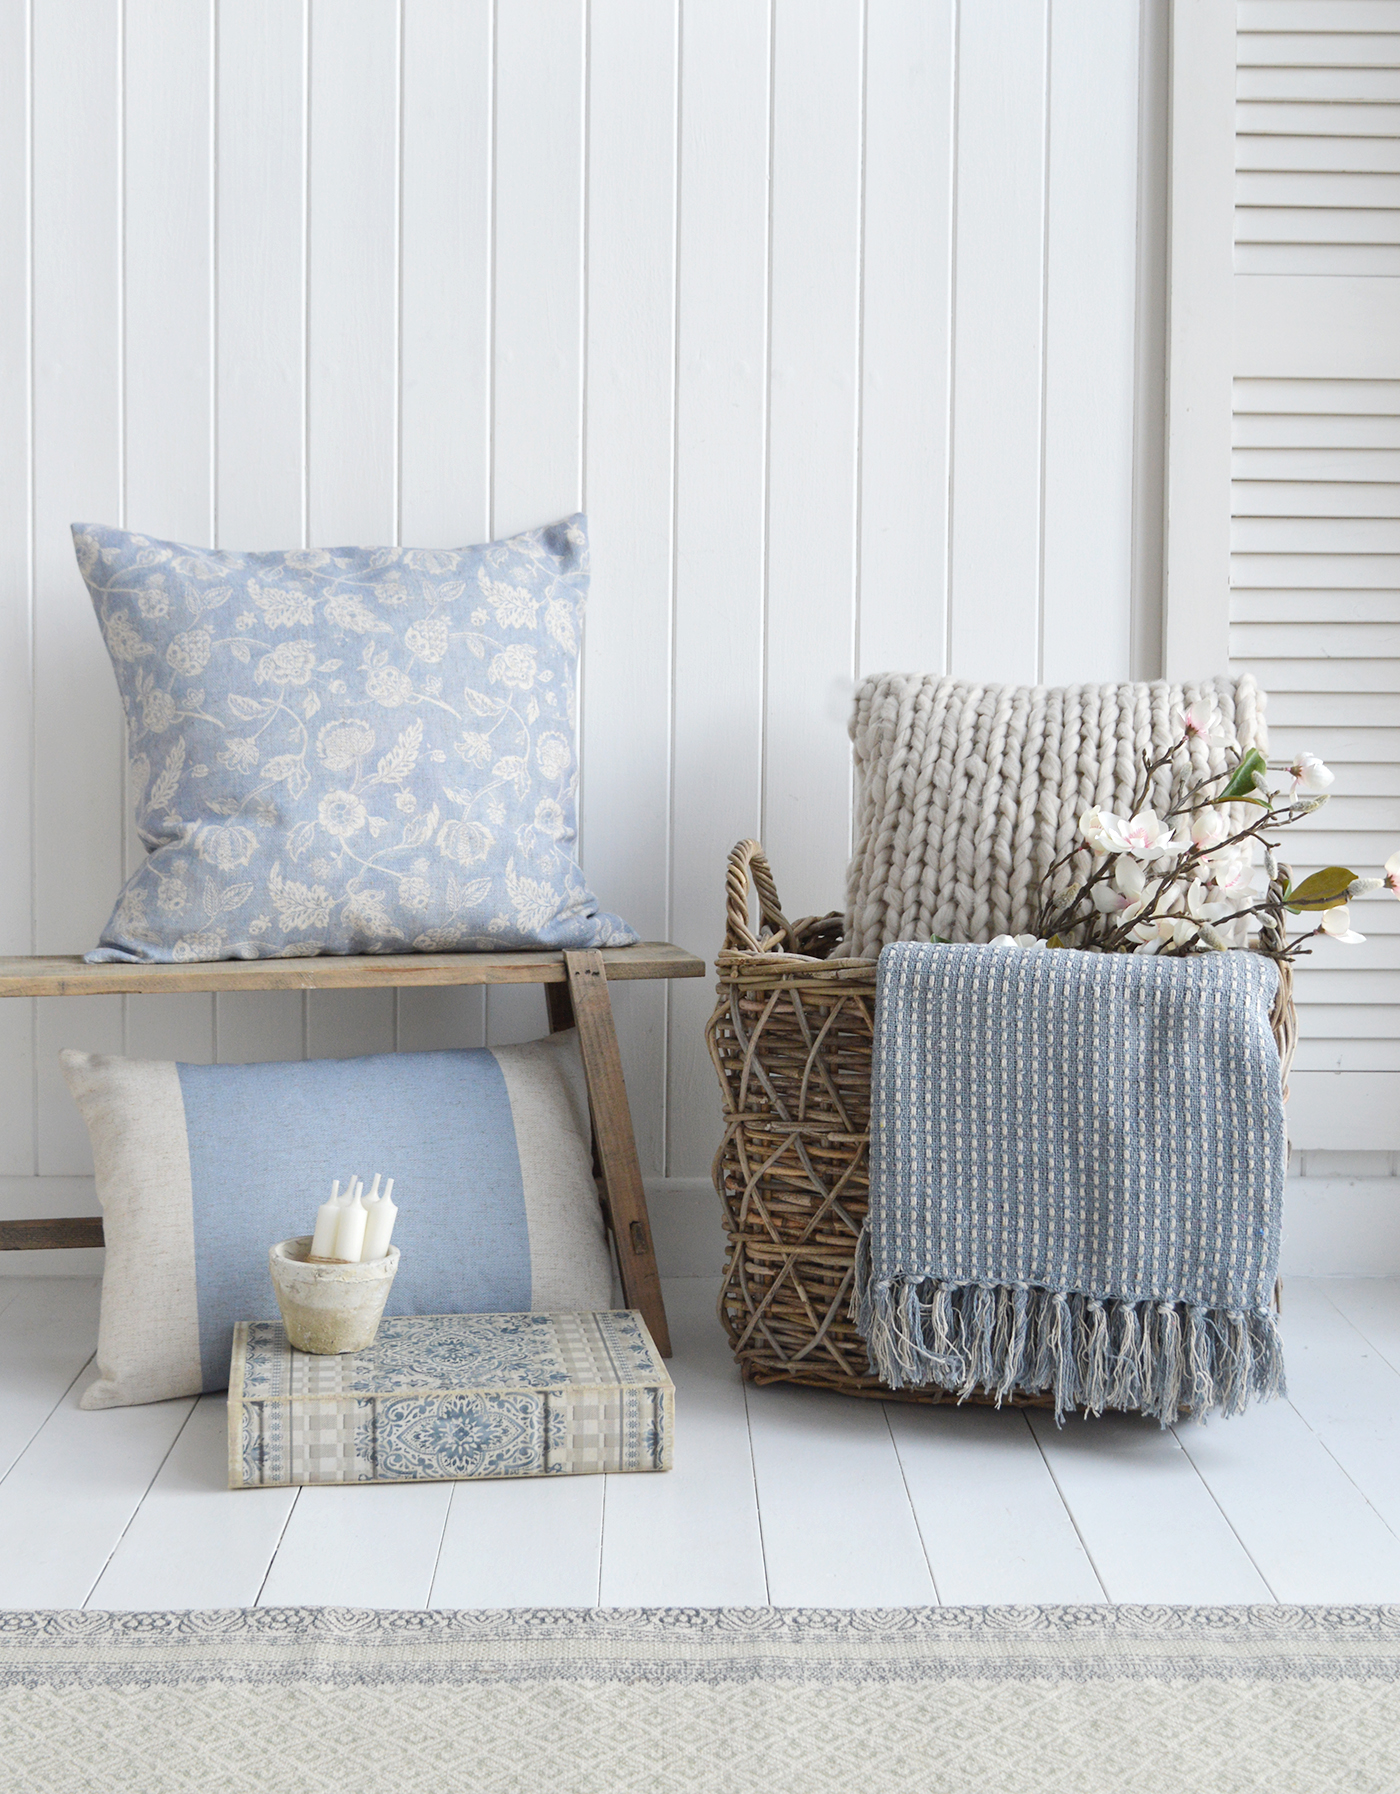 Meredith New England style cushions for country and coasted homes and interiors from The White Lighhtouse Furniture